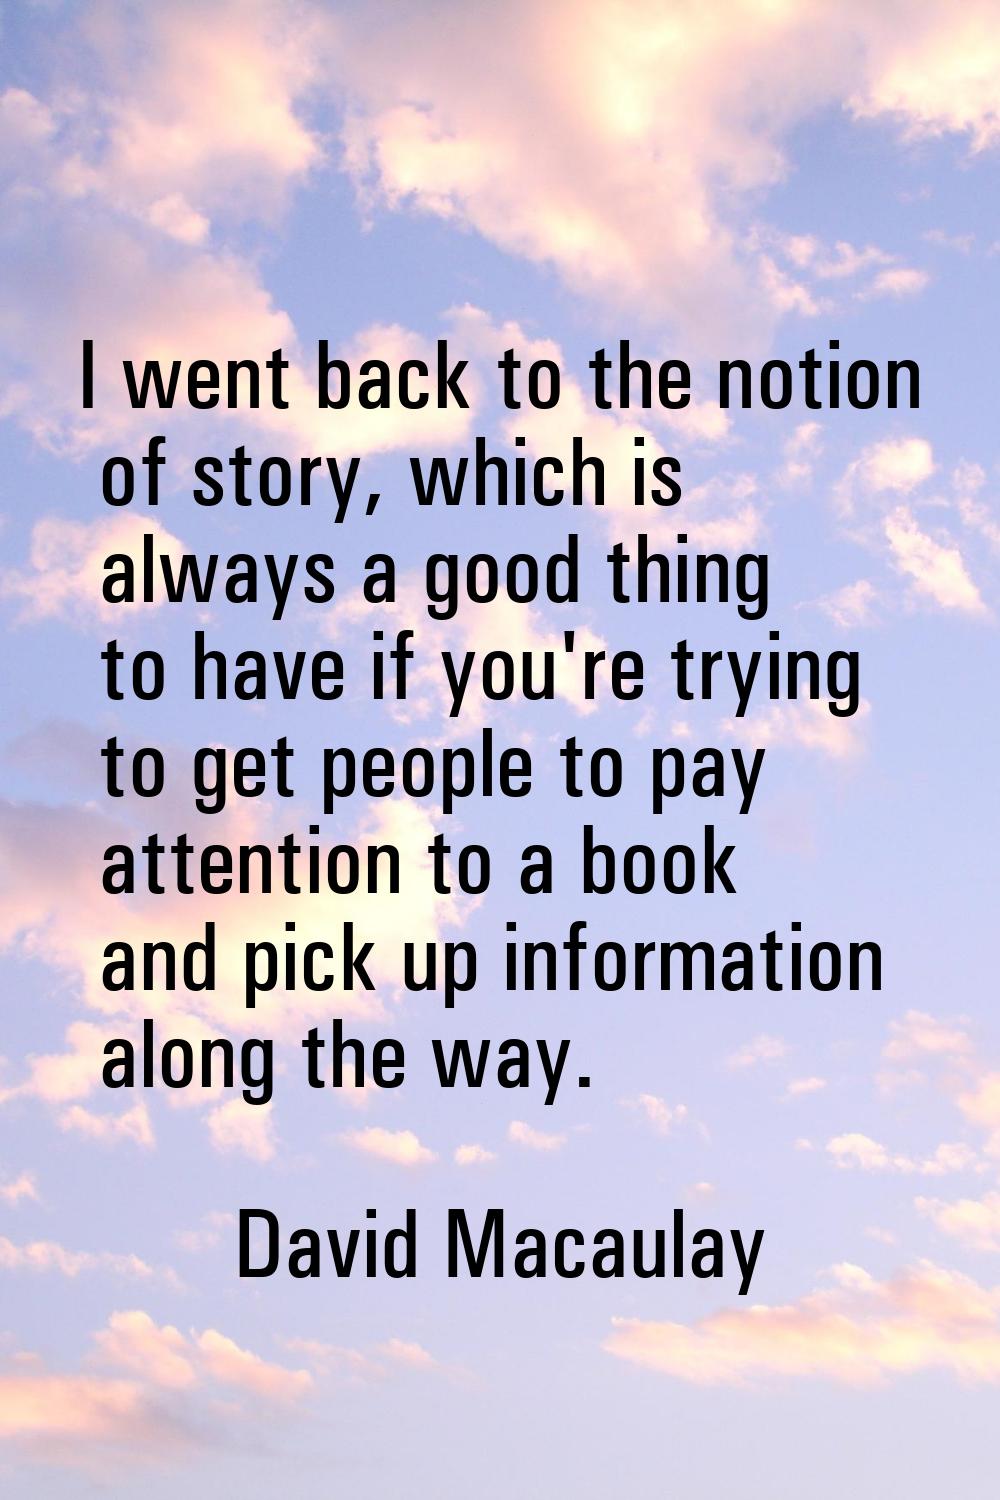 I went back to the notion of story, which is always a good thing to have if you're trying to get pe